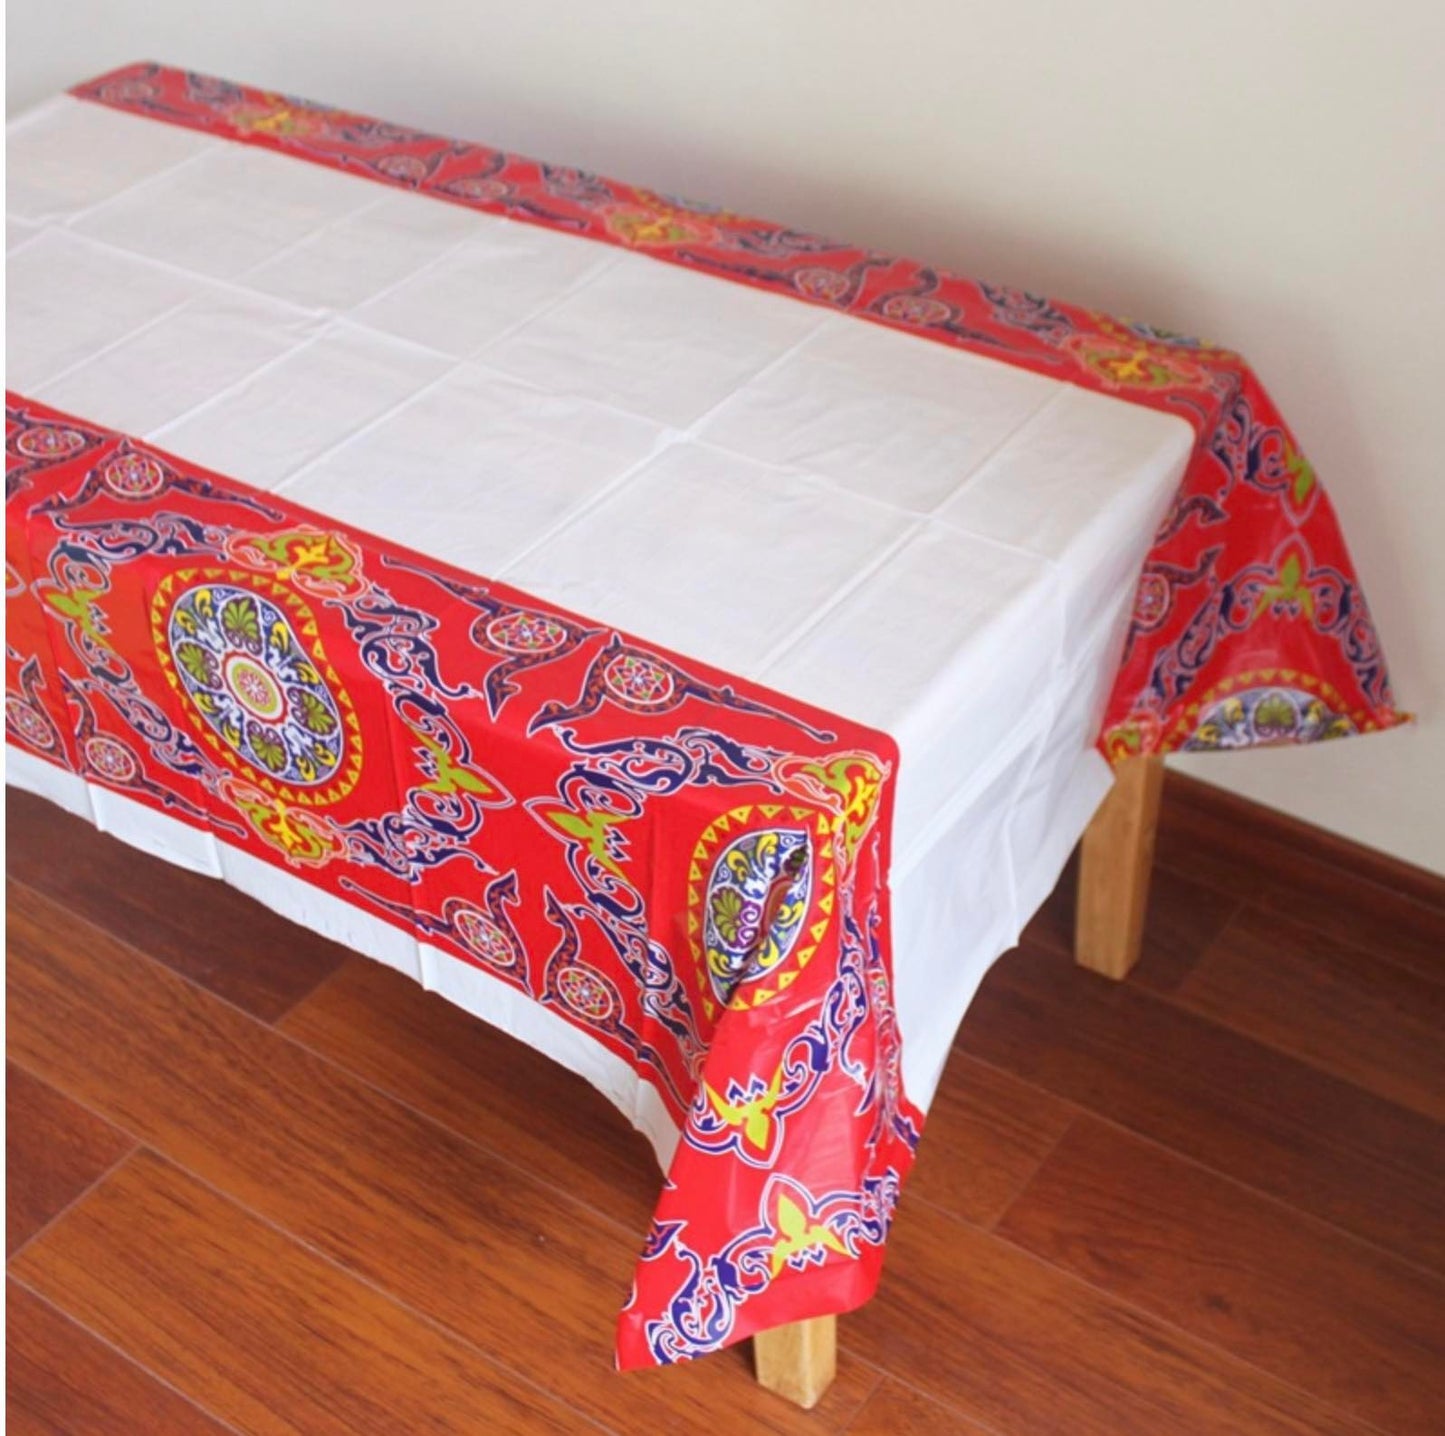 Tablecloth Table Cloths Eid Mubarak Ramadan Table Cover Waterproof Moslem Islamism Party Table Protector for Muslim Festival Decorations Supplies Mixed Style Middle Eastern Boutique